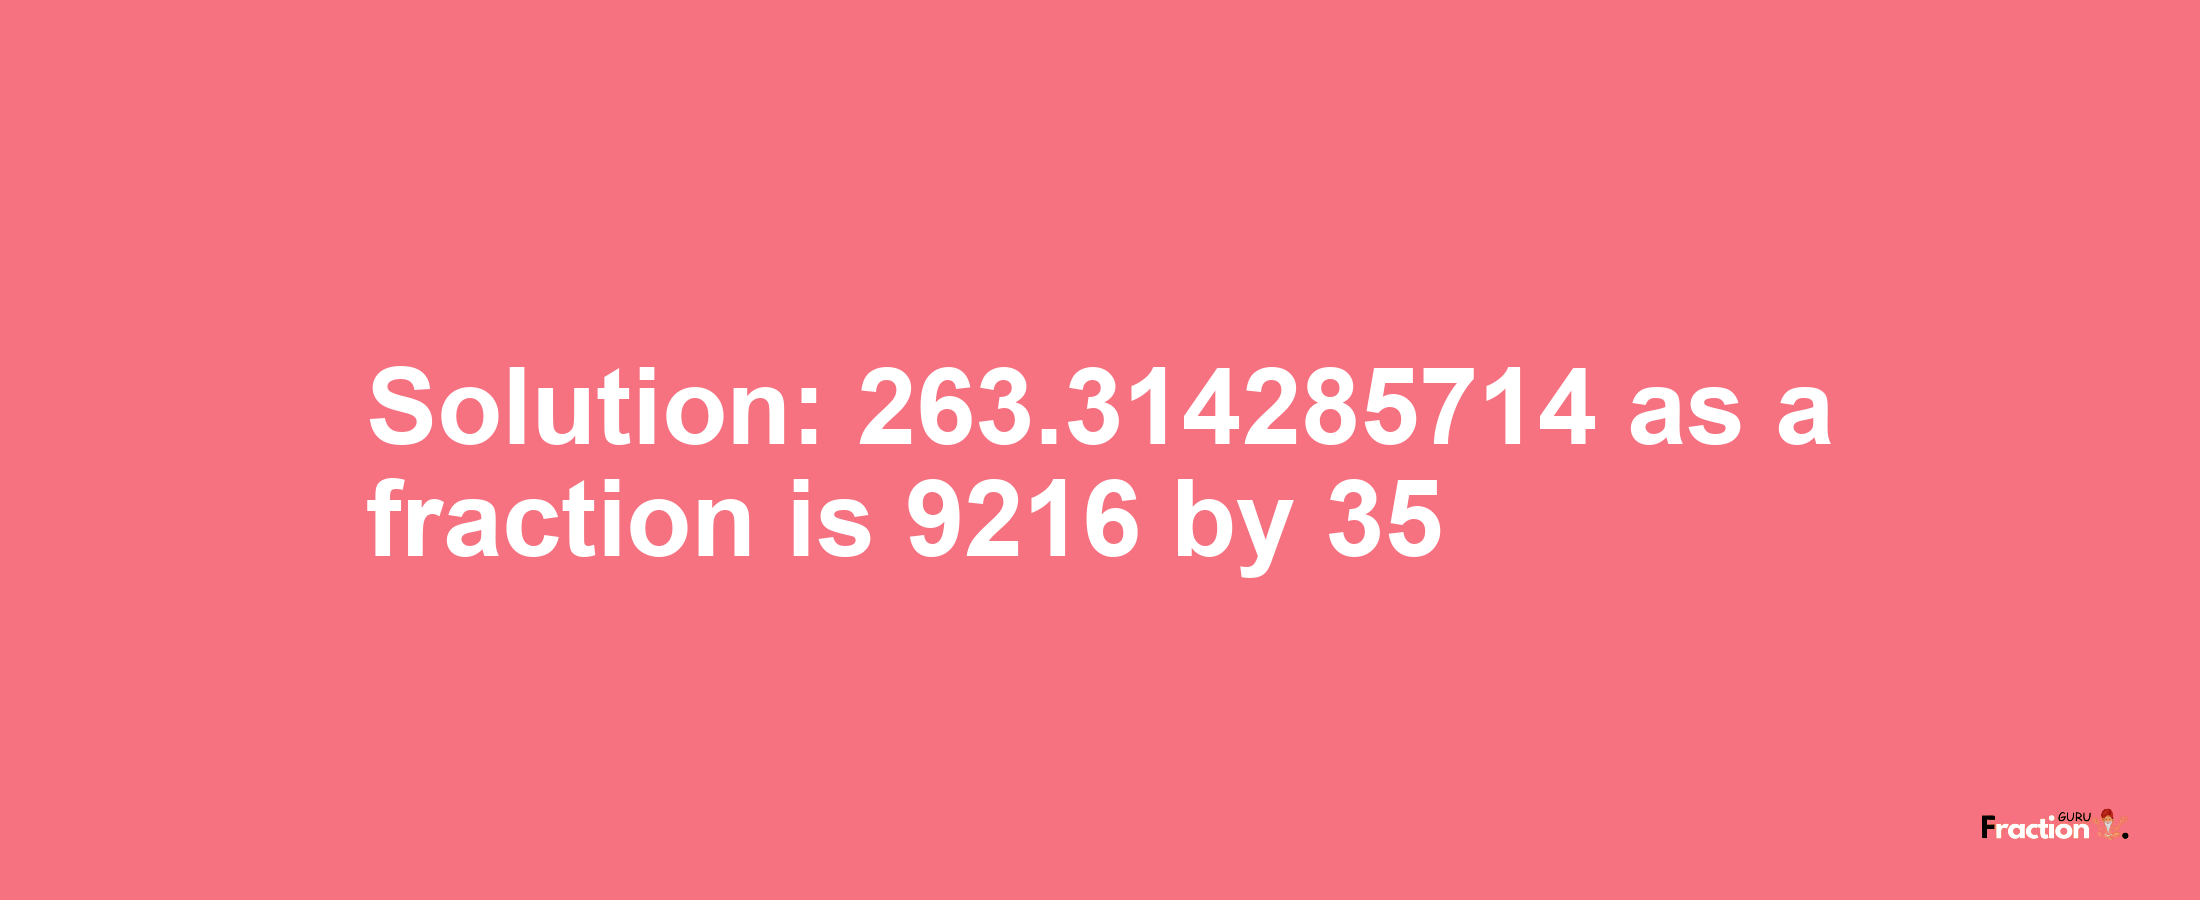 Solution:263.314285714 as a fraction is 9216/35